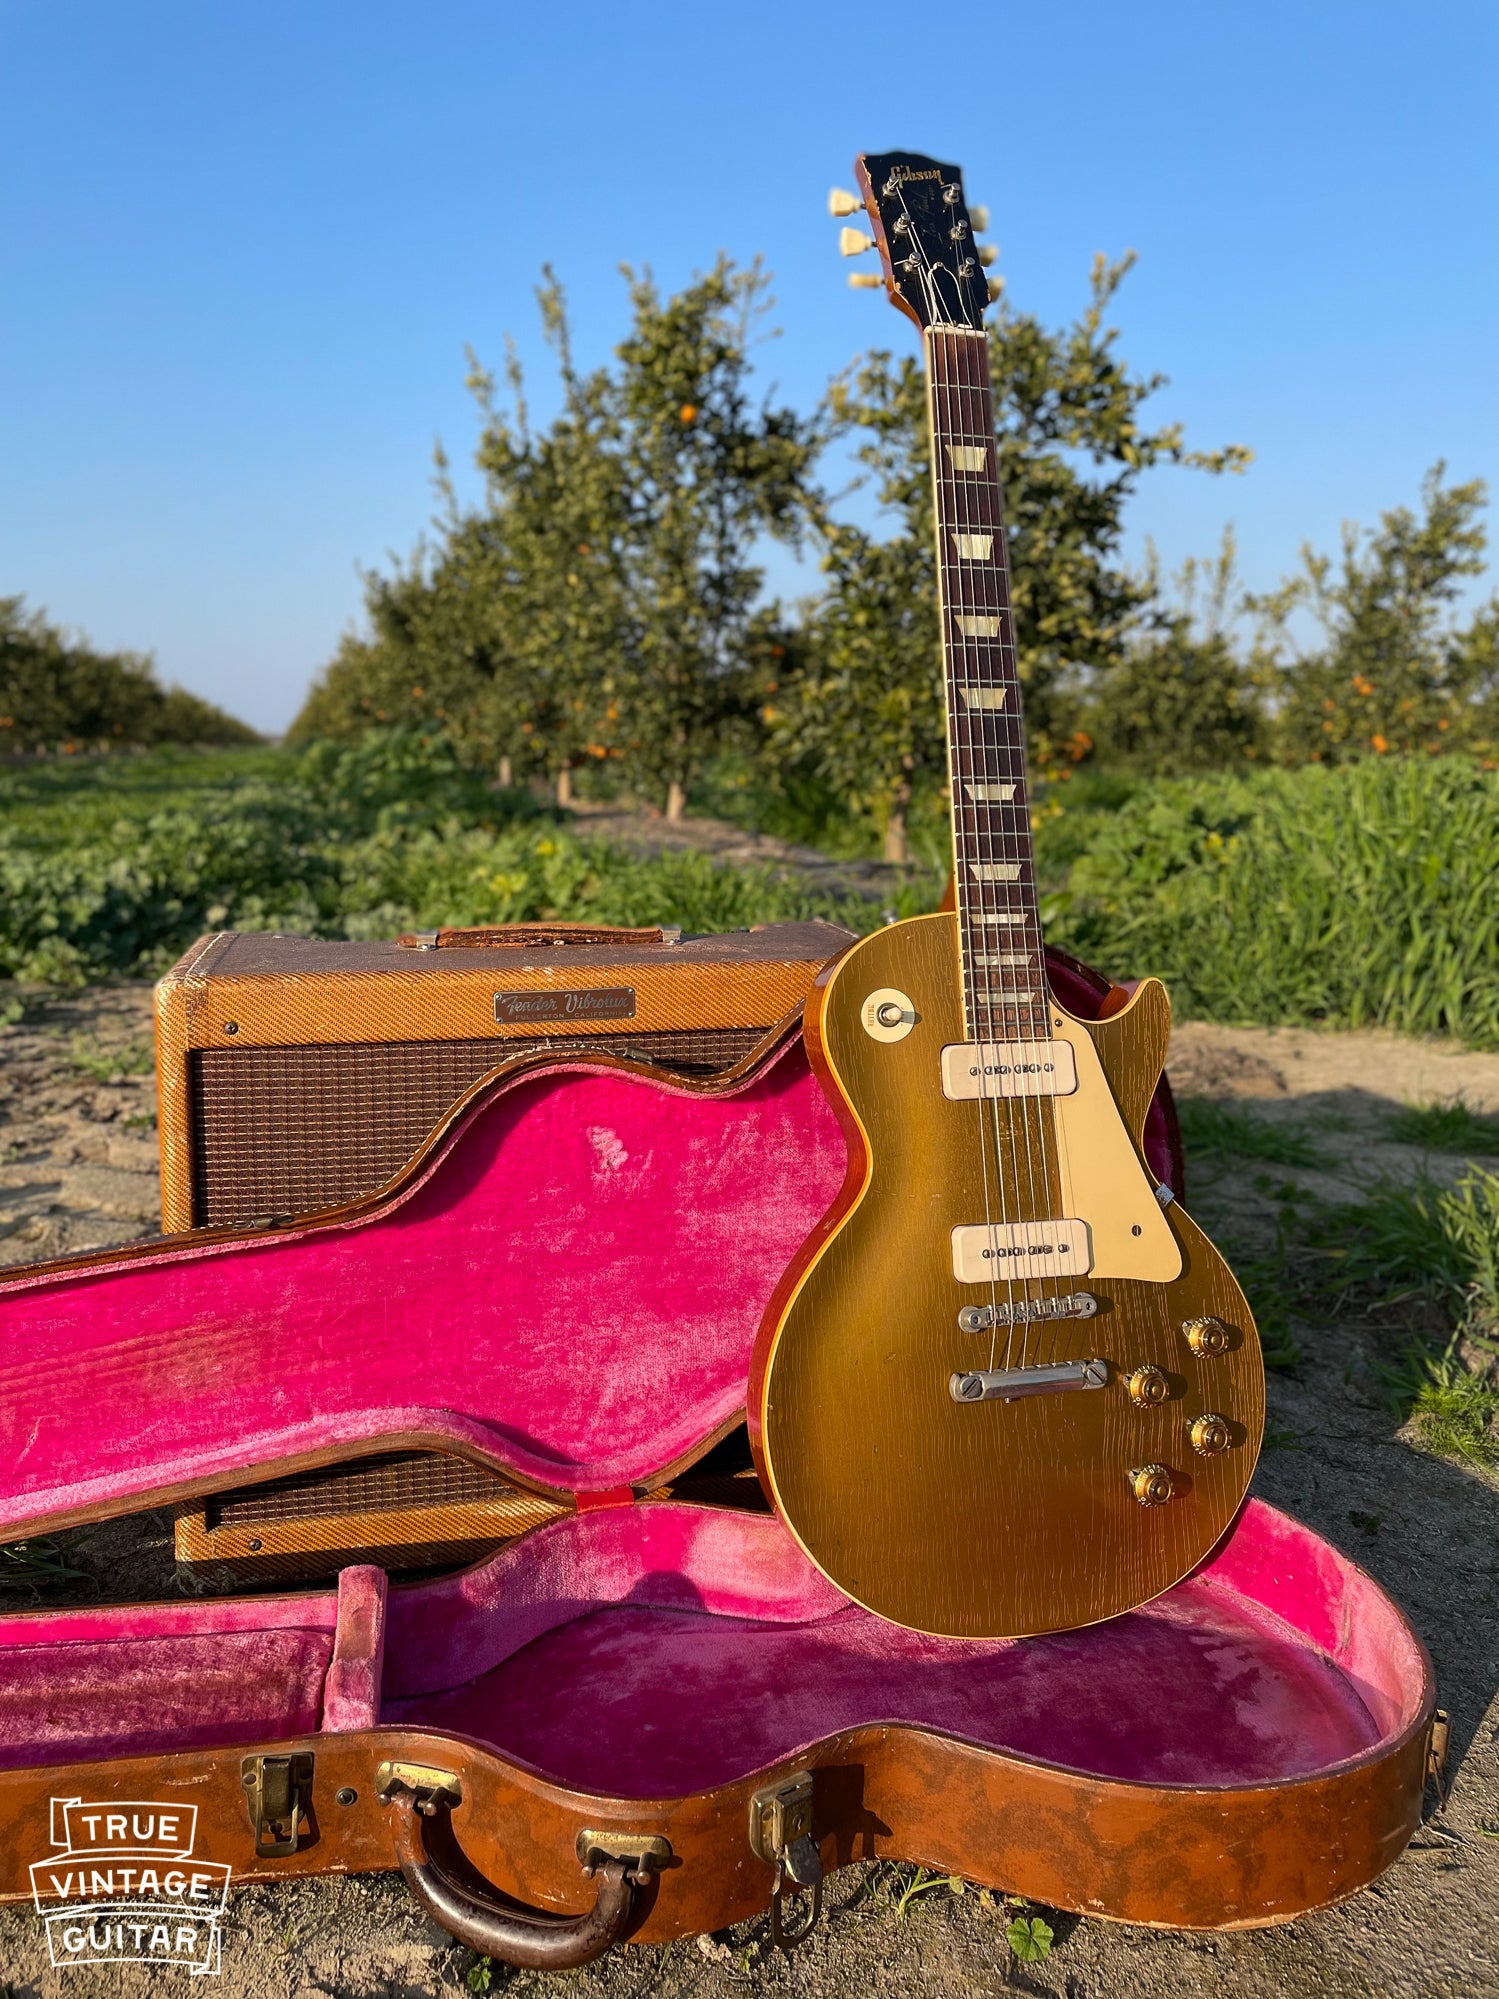 Gibson Les Paul 1956 vintage guitar, goldtop, gold guitar with brown and pink case